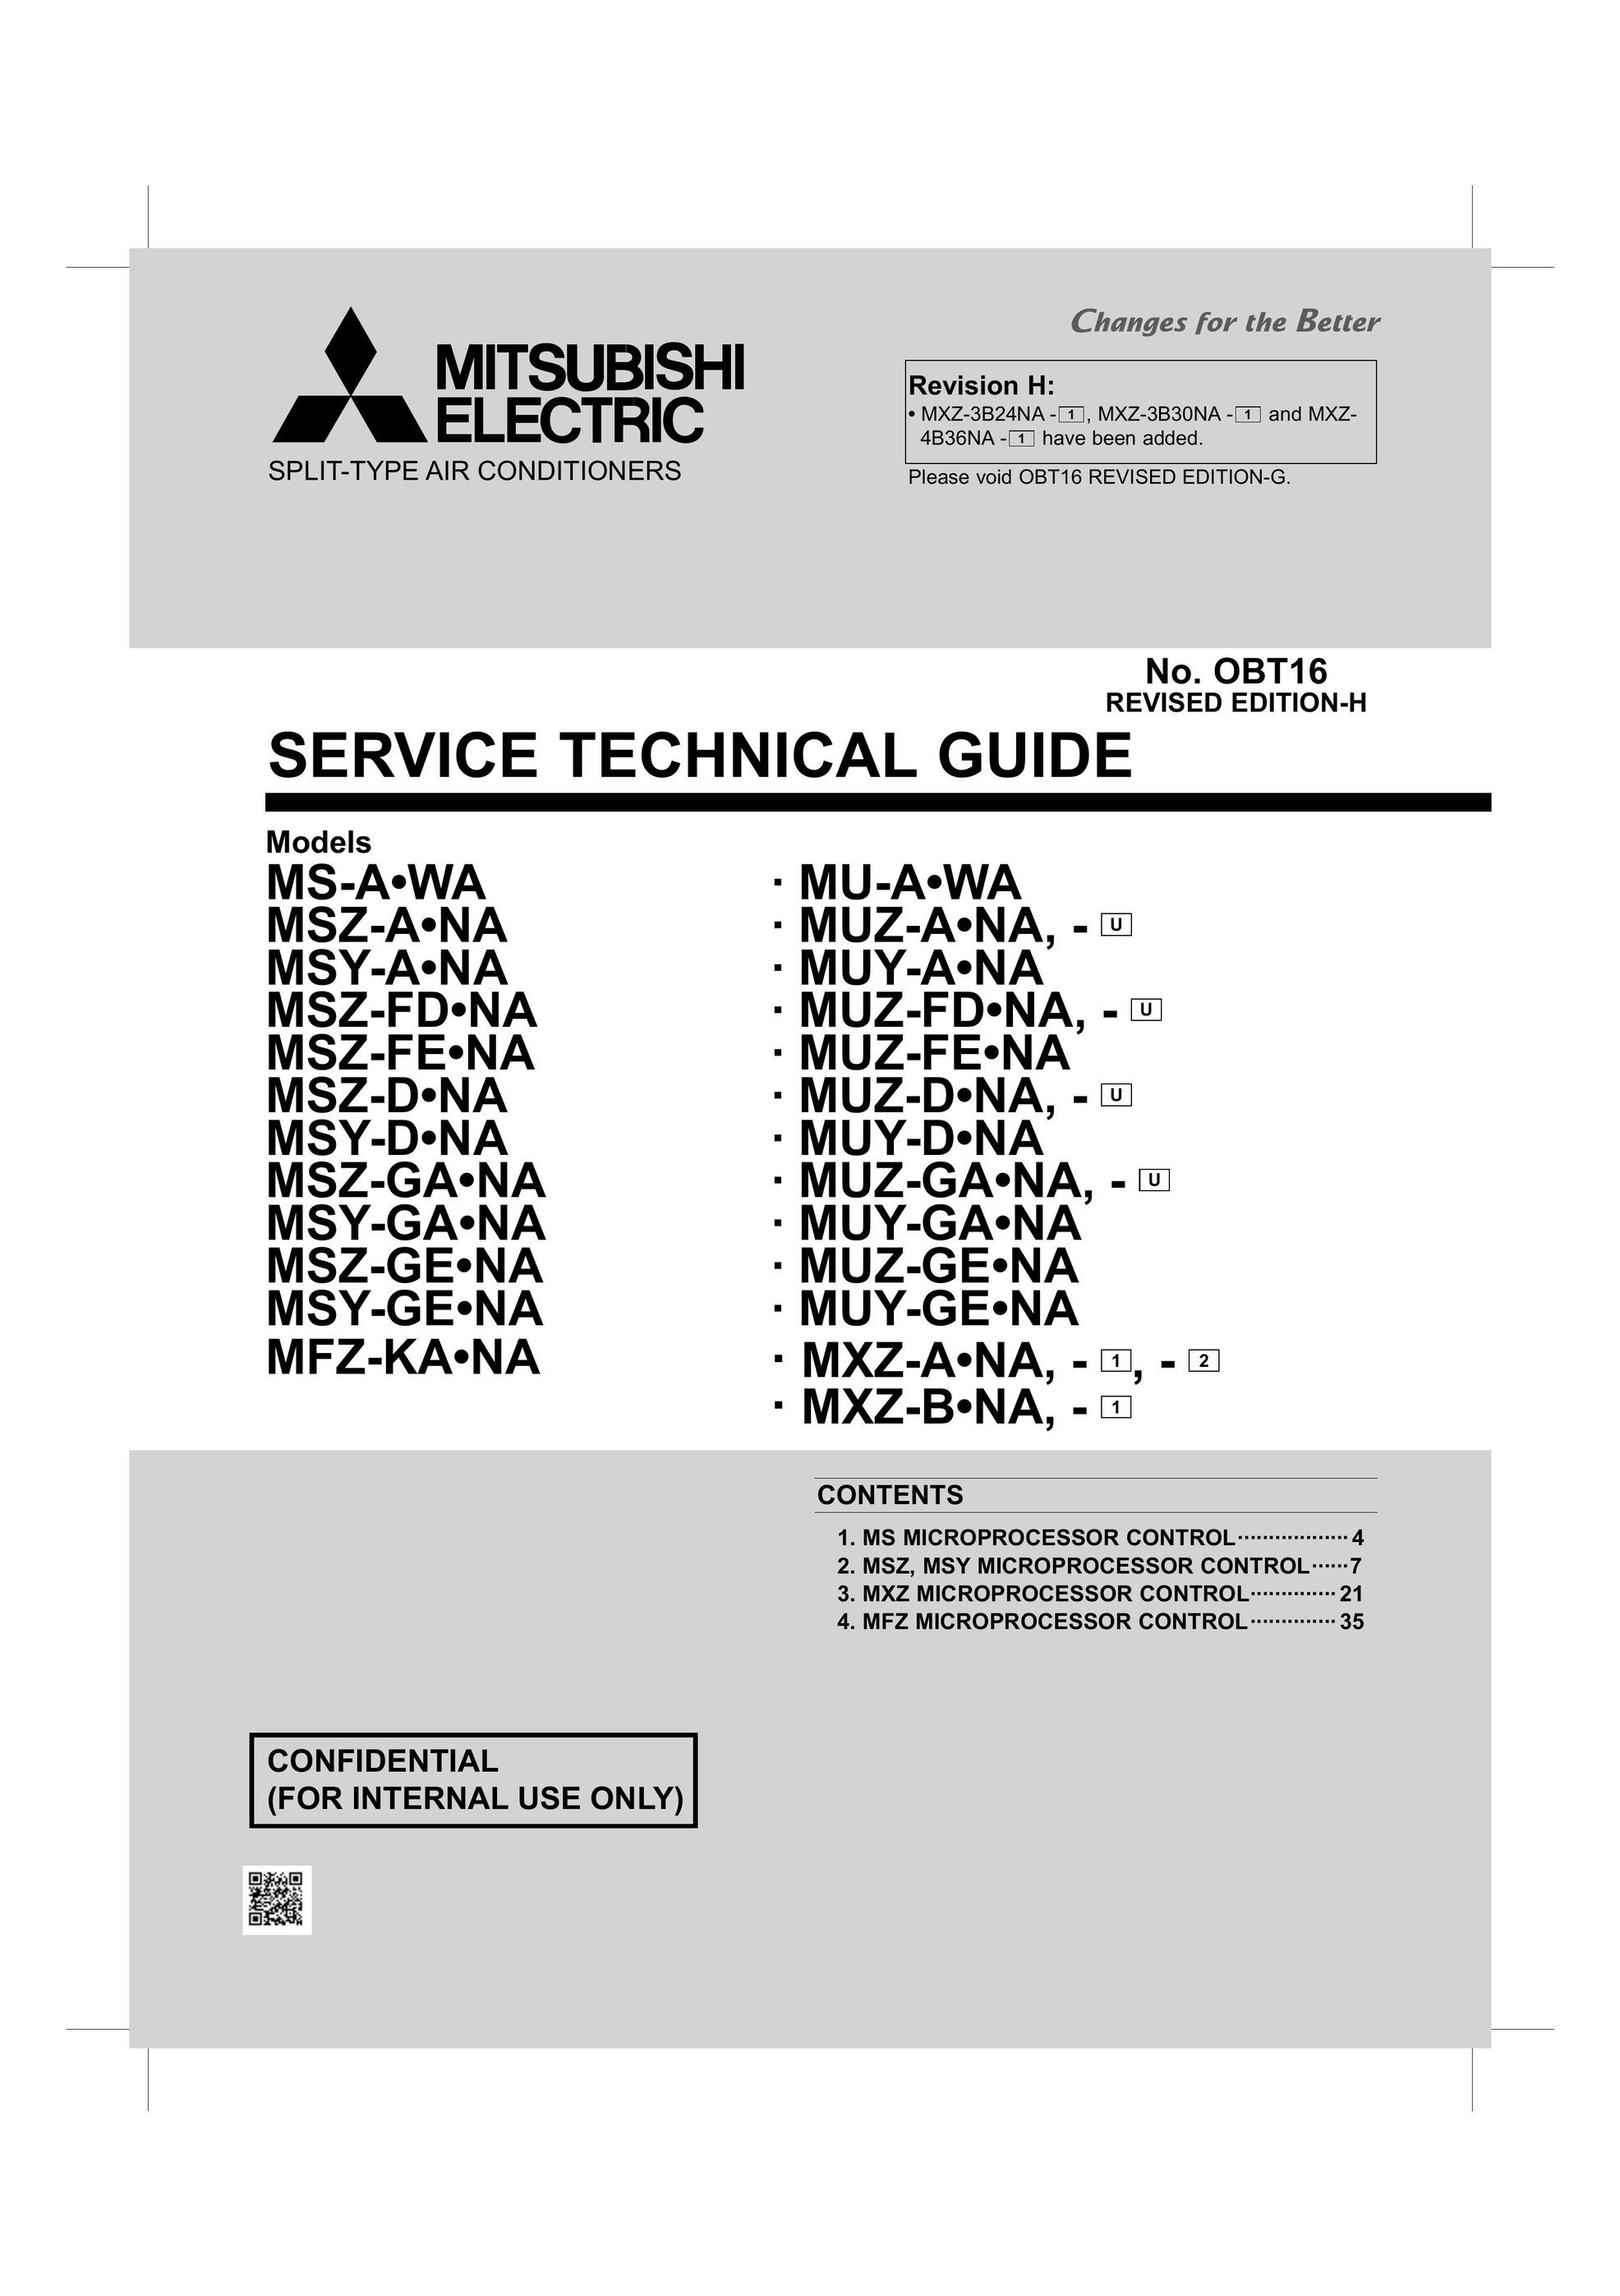 Mitsumi electronic MSZ-FDNA Air Conditioner User Manual